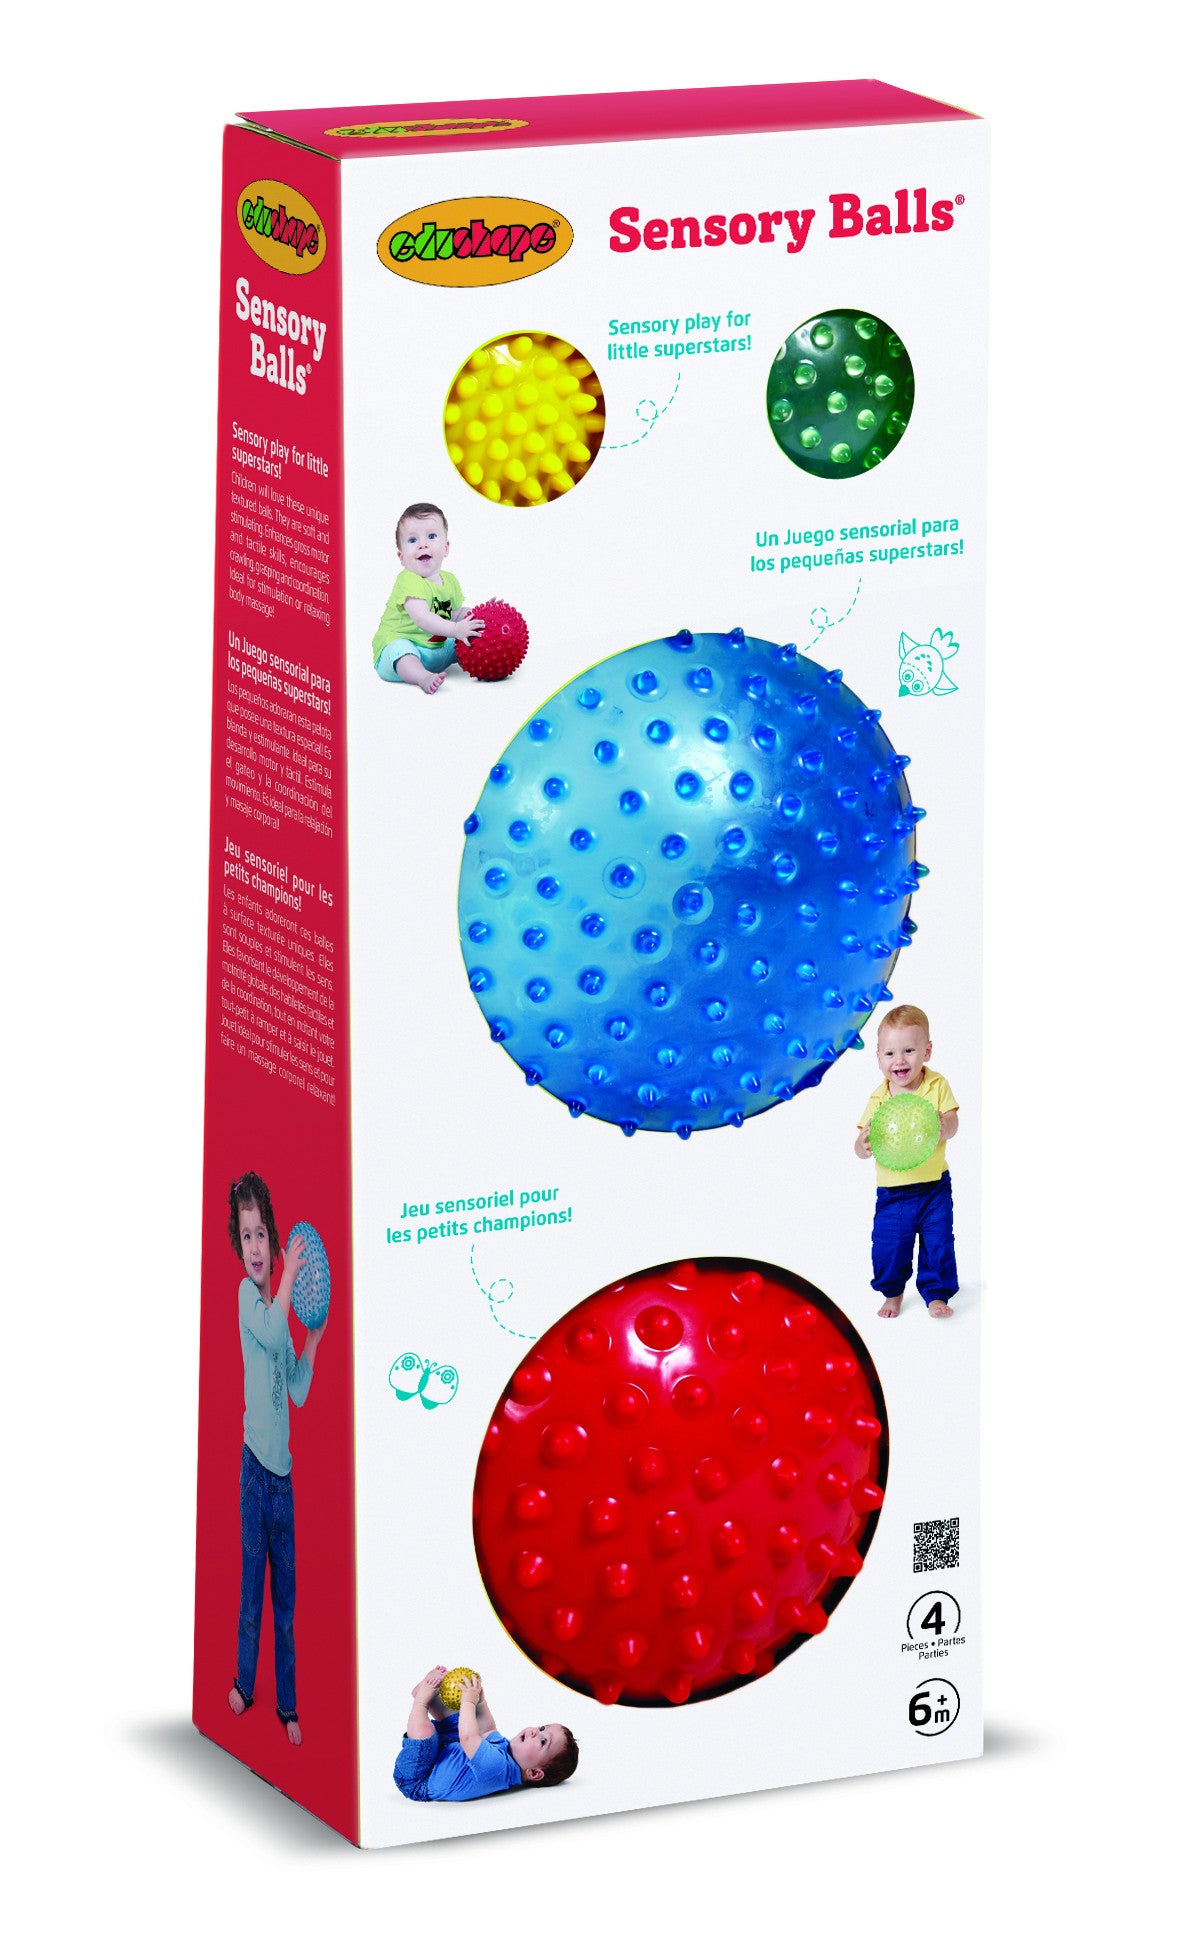 3 Piece Anti Stress Ball Kit Great for Relaxation & Relief Calming  Exercises - Sensory Toy Warehouse - Special Needs Developmental Toys